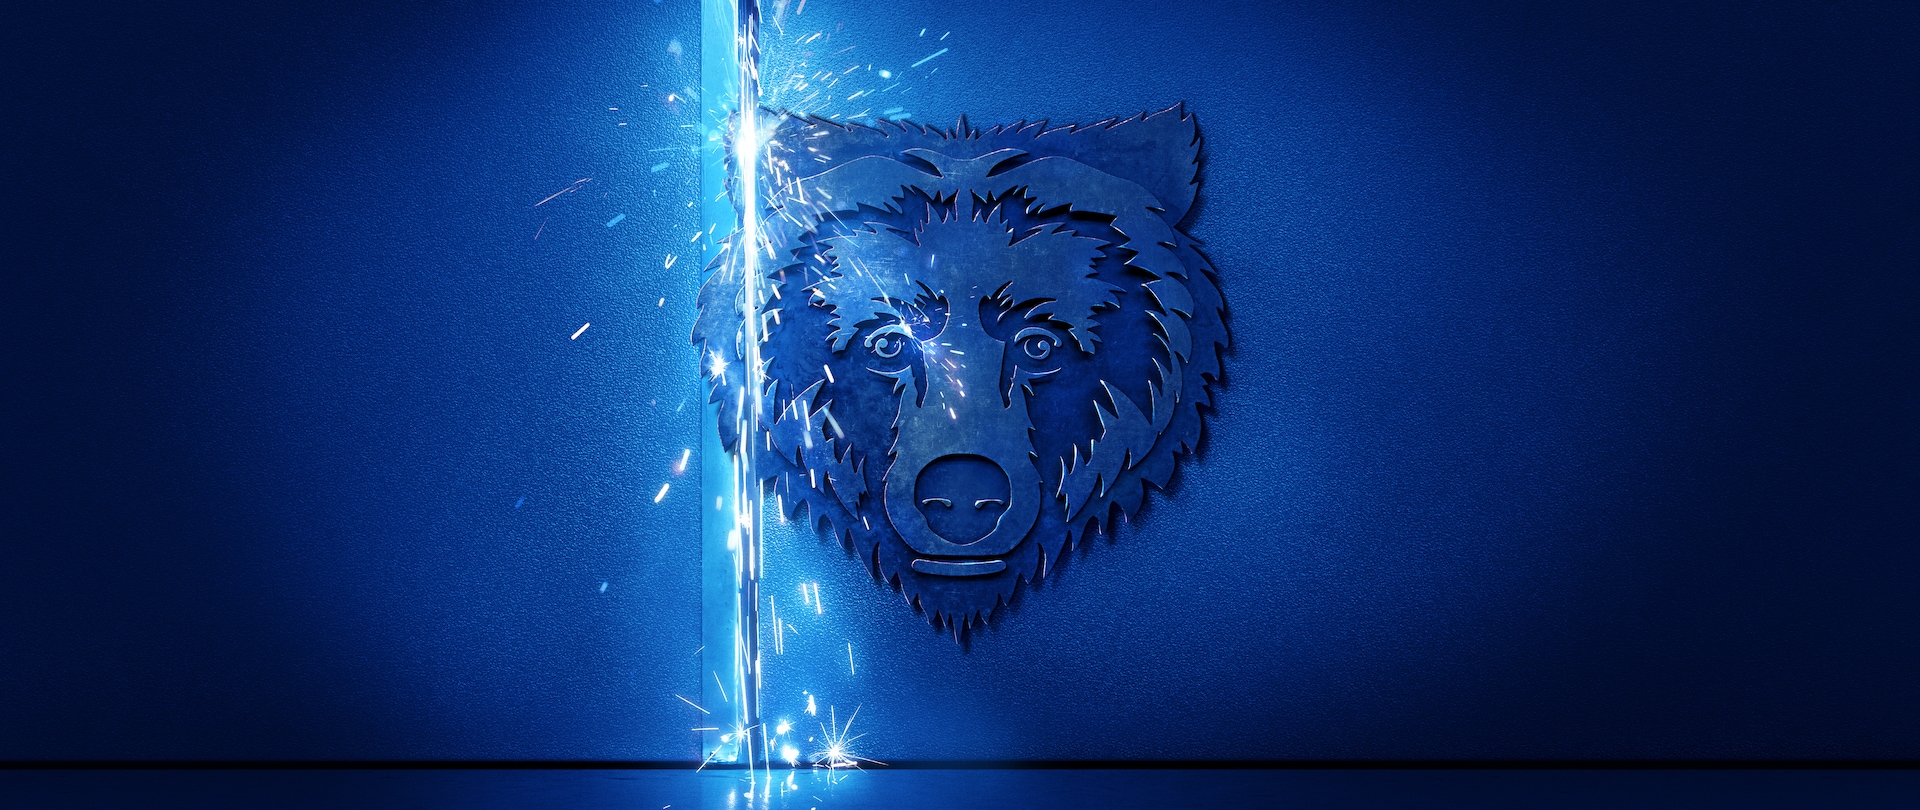 Blue themed image of a grizzly bear’s head cut into metal with white sparks flying down on the left.